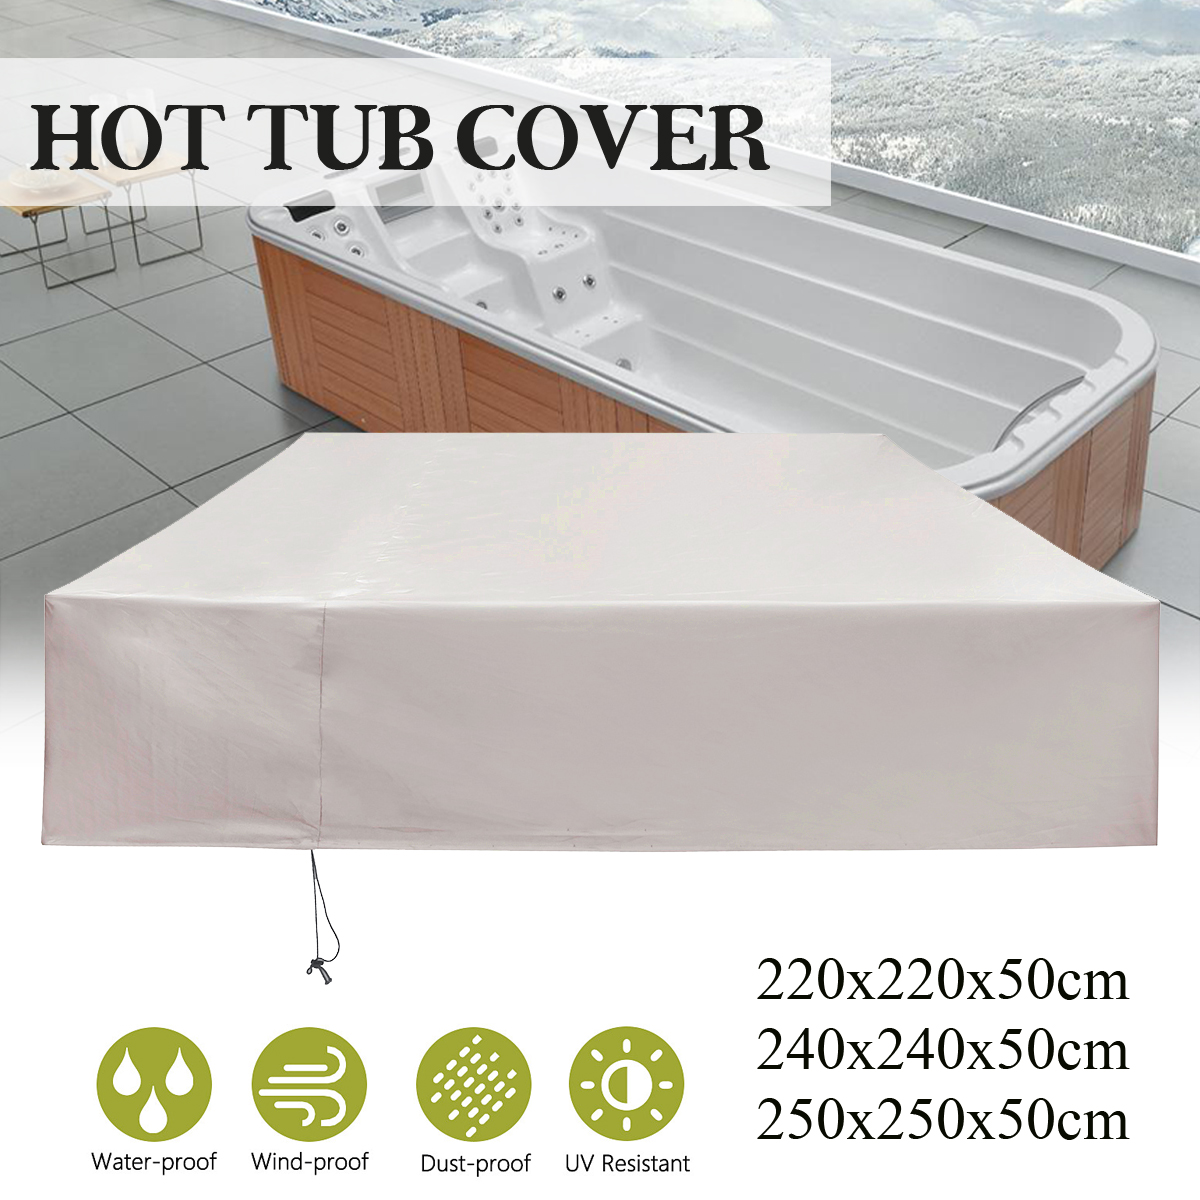 250240220CM-Outdoors-Spa-Hot-Tub-Cover-Waterproof-Furniture-Garden-Protector-1636533-1